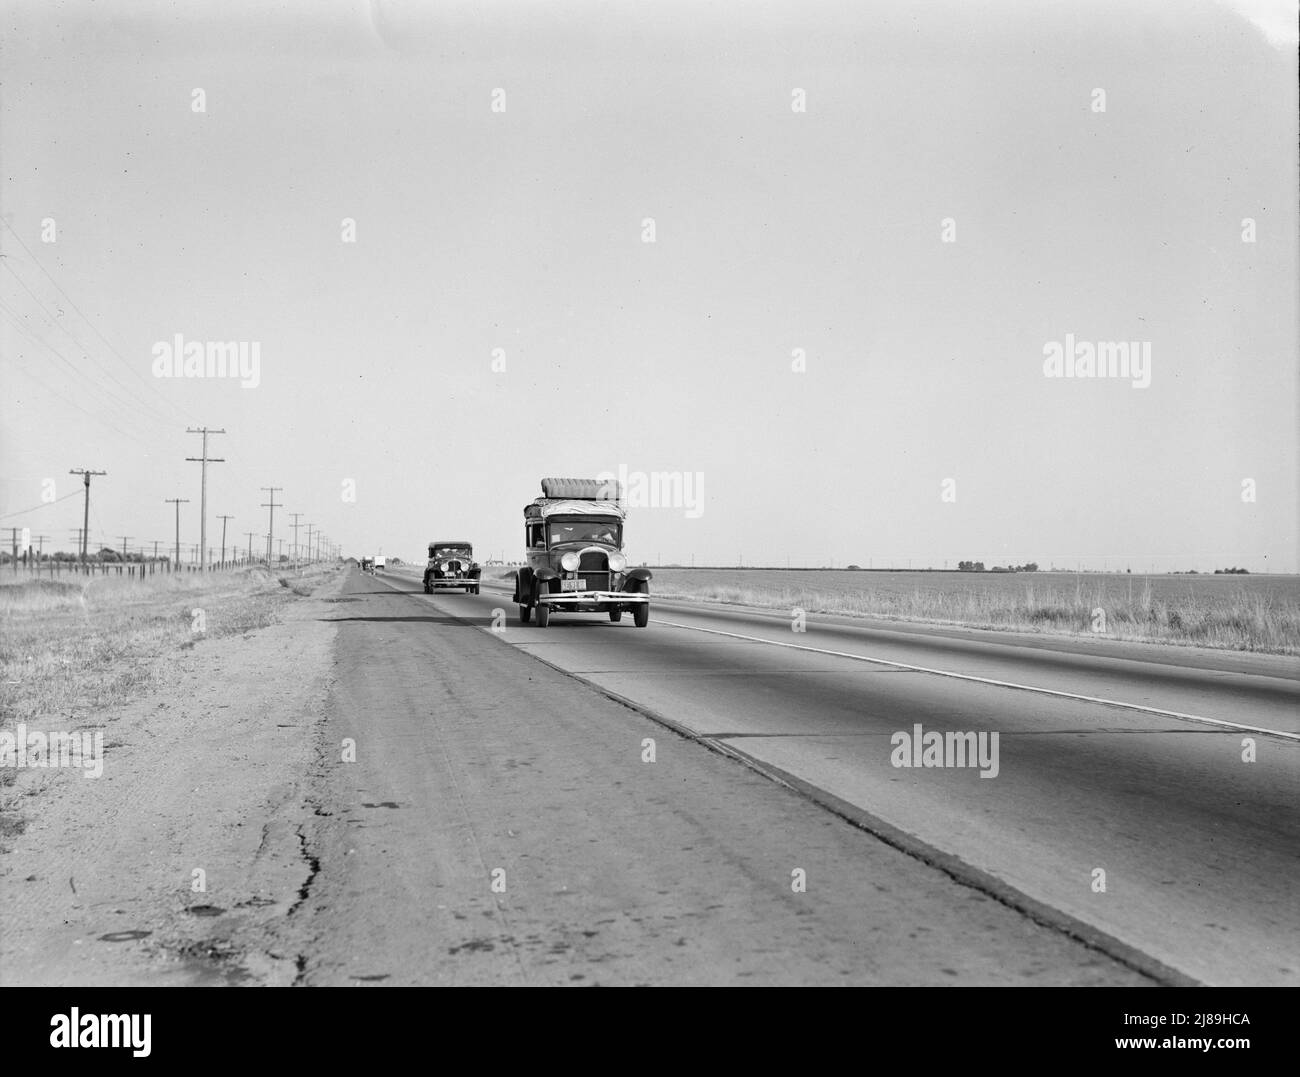 Between Tulare and Fresno. Migrants on the road. California. Stock Photo